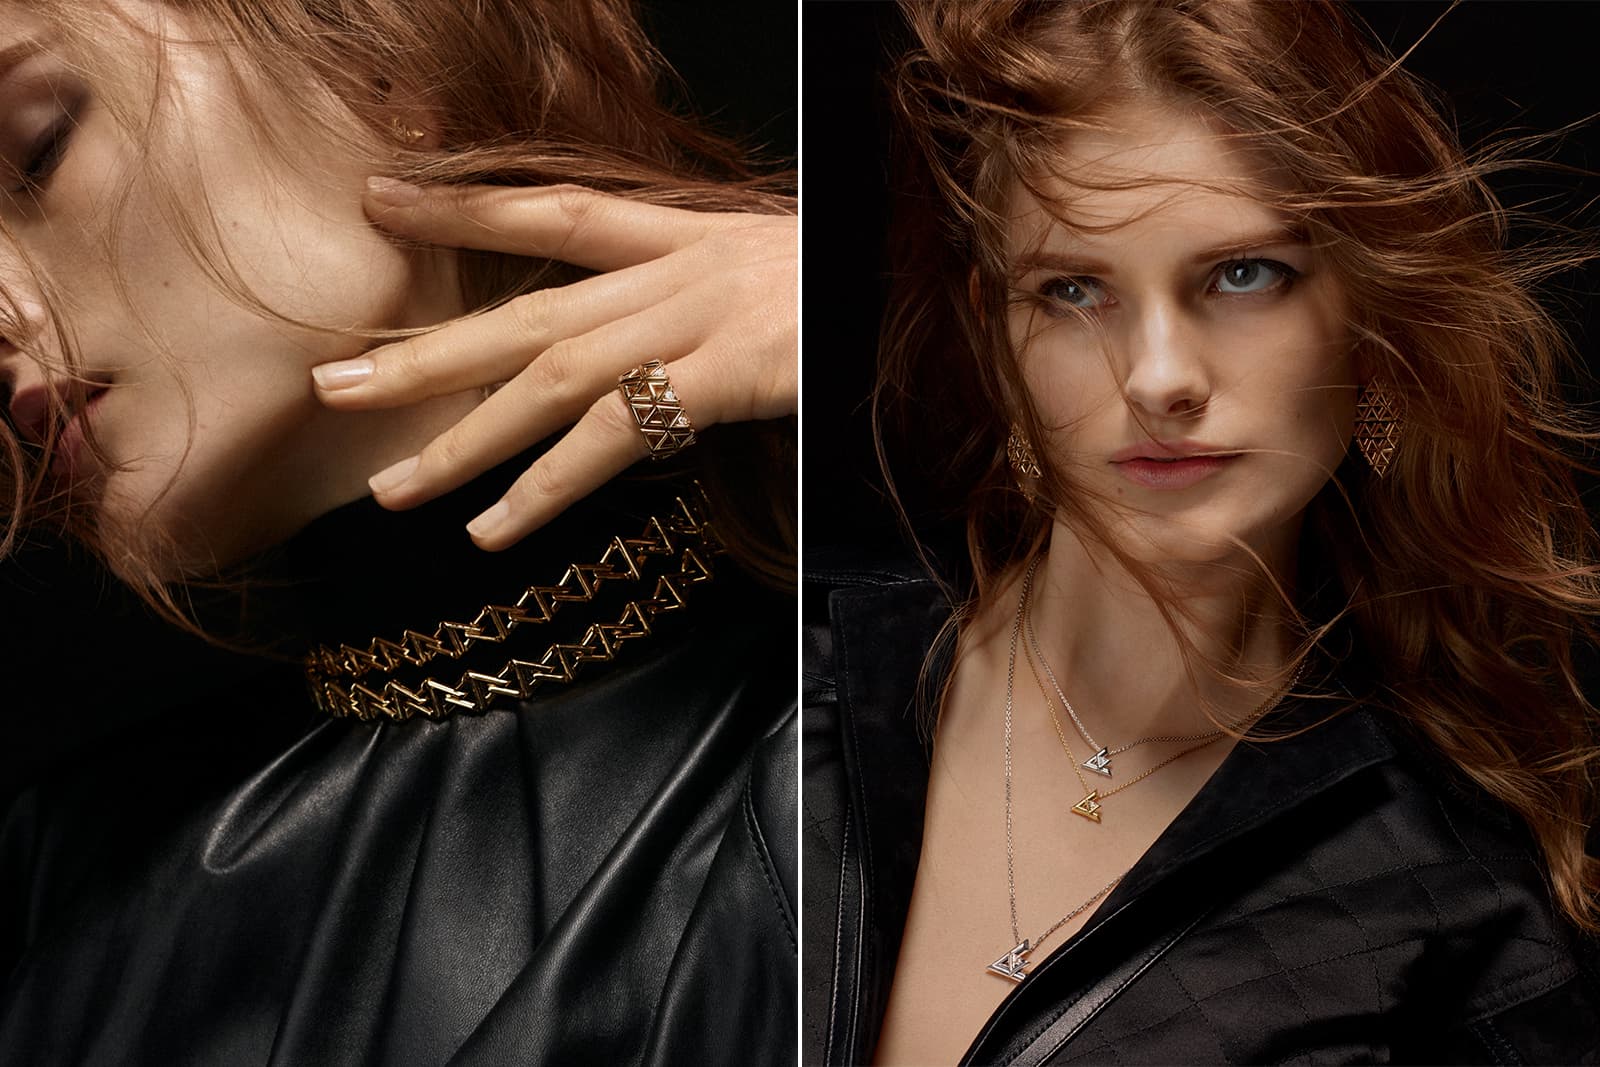 LV Volt - the new graphic collection of unisex jewelry from Louis